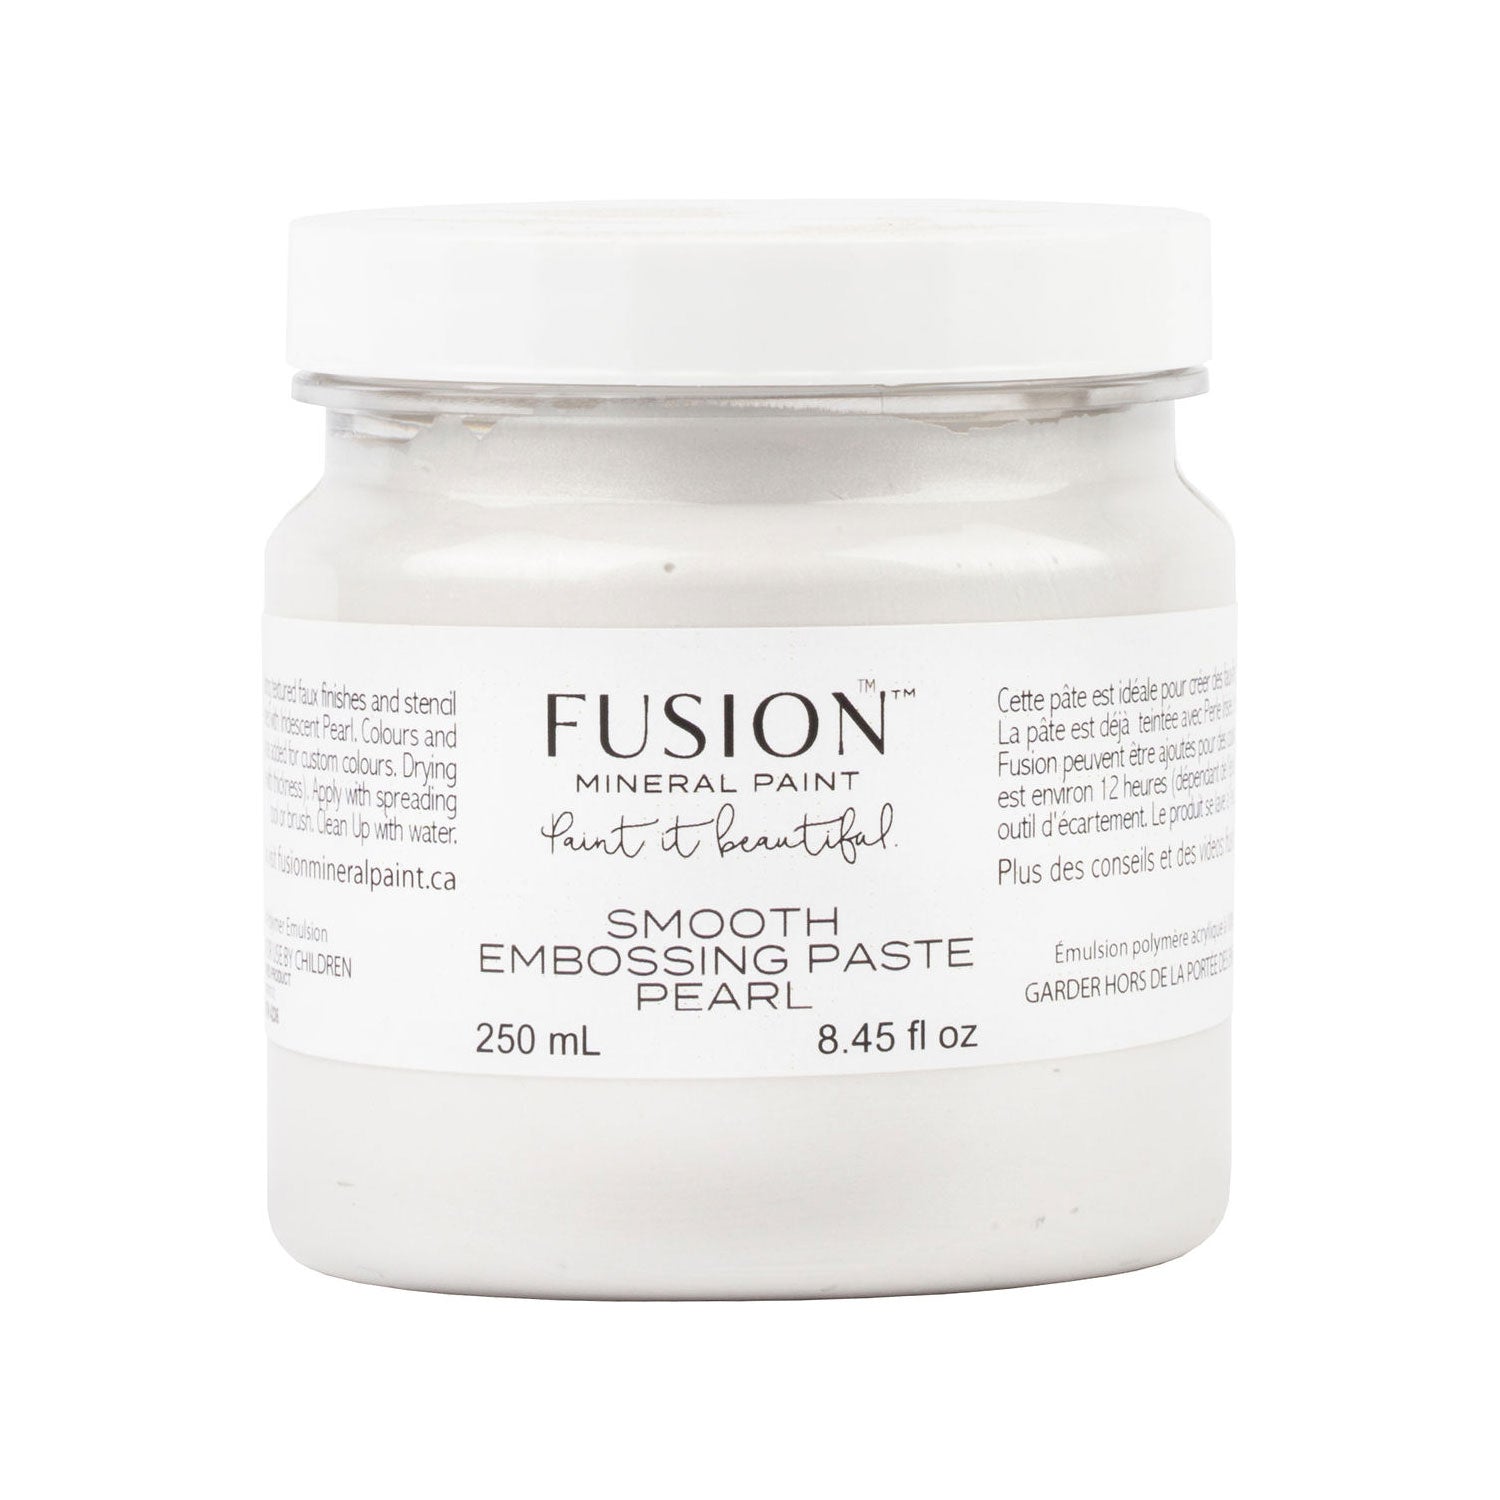 Fusion Mineral Paint - Embossing Paste